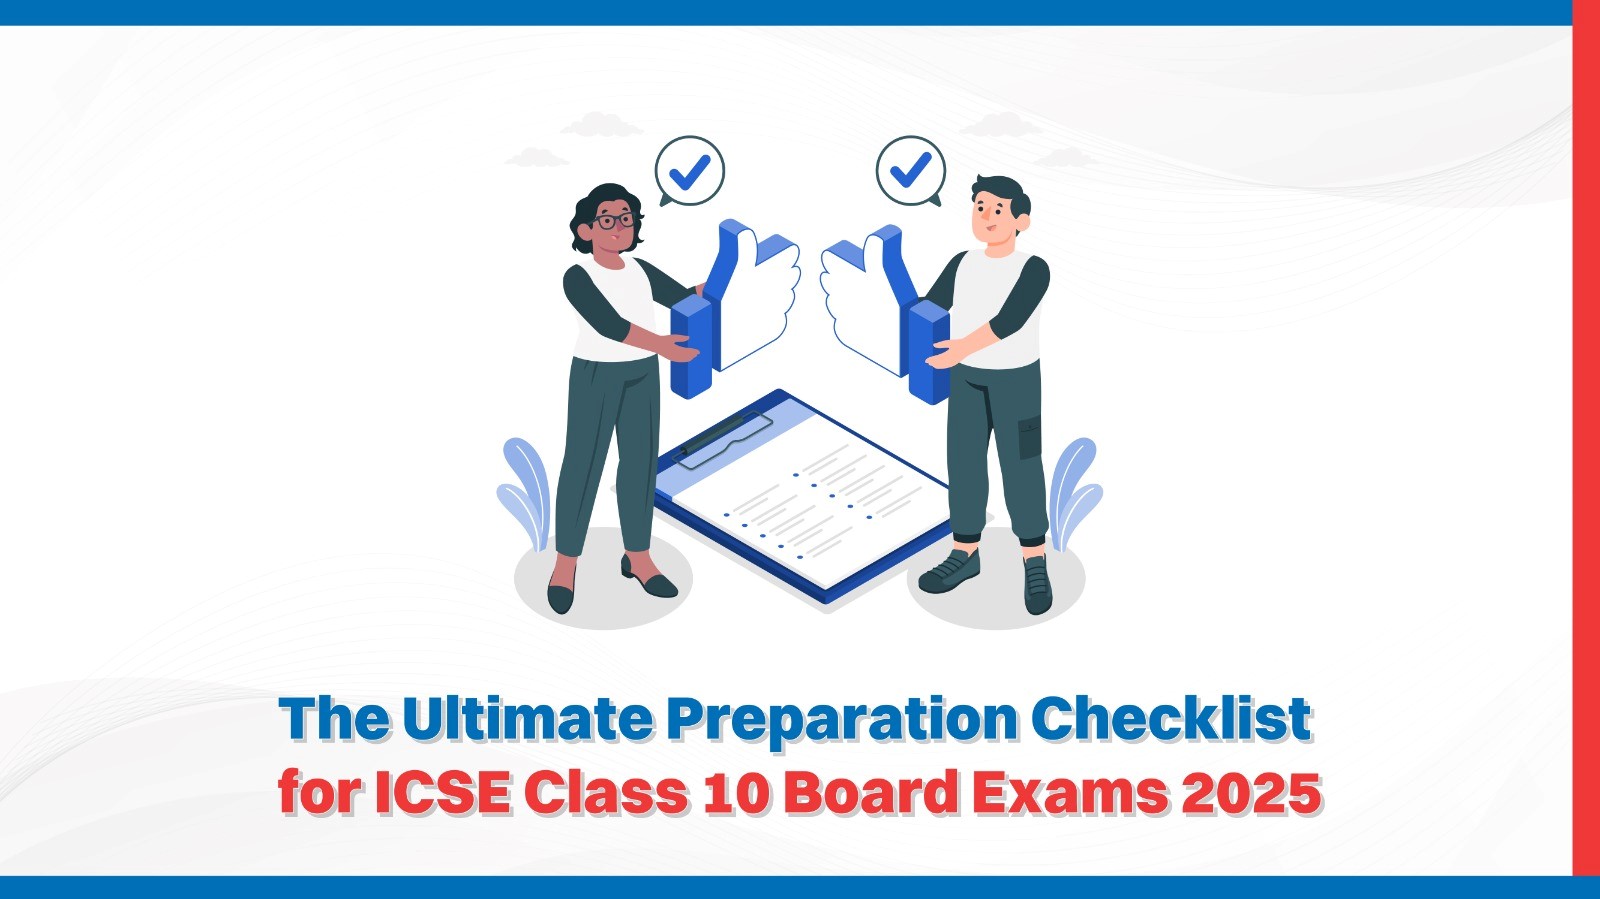 The Ultimate Preparation Checklist for ICSE Class 10 Board Exams 2025